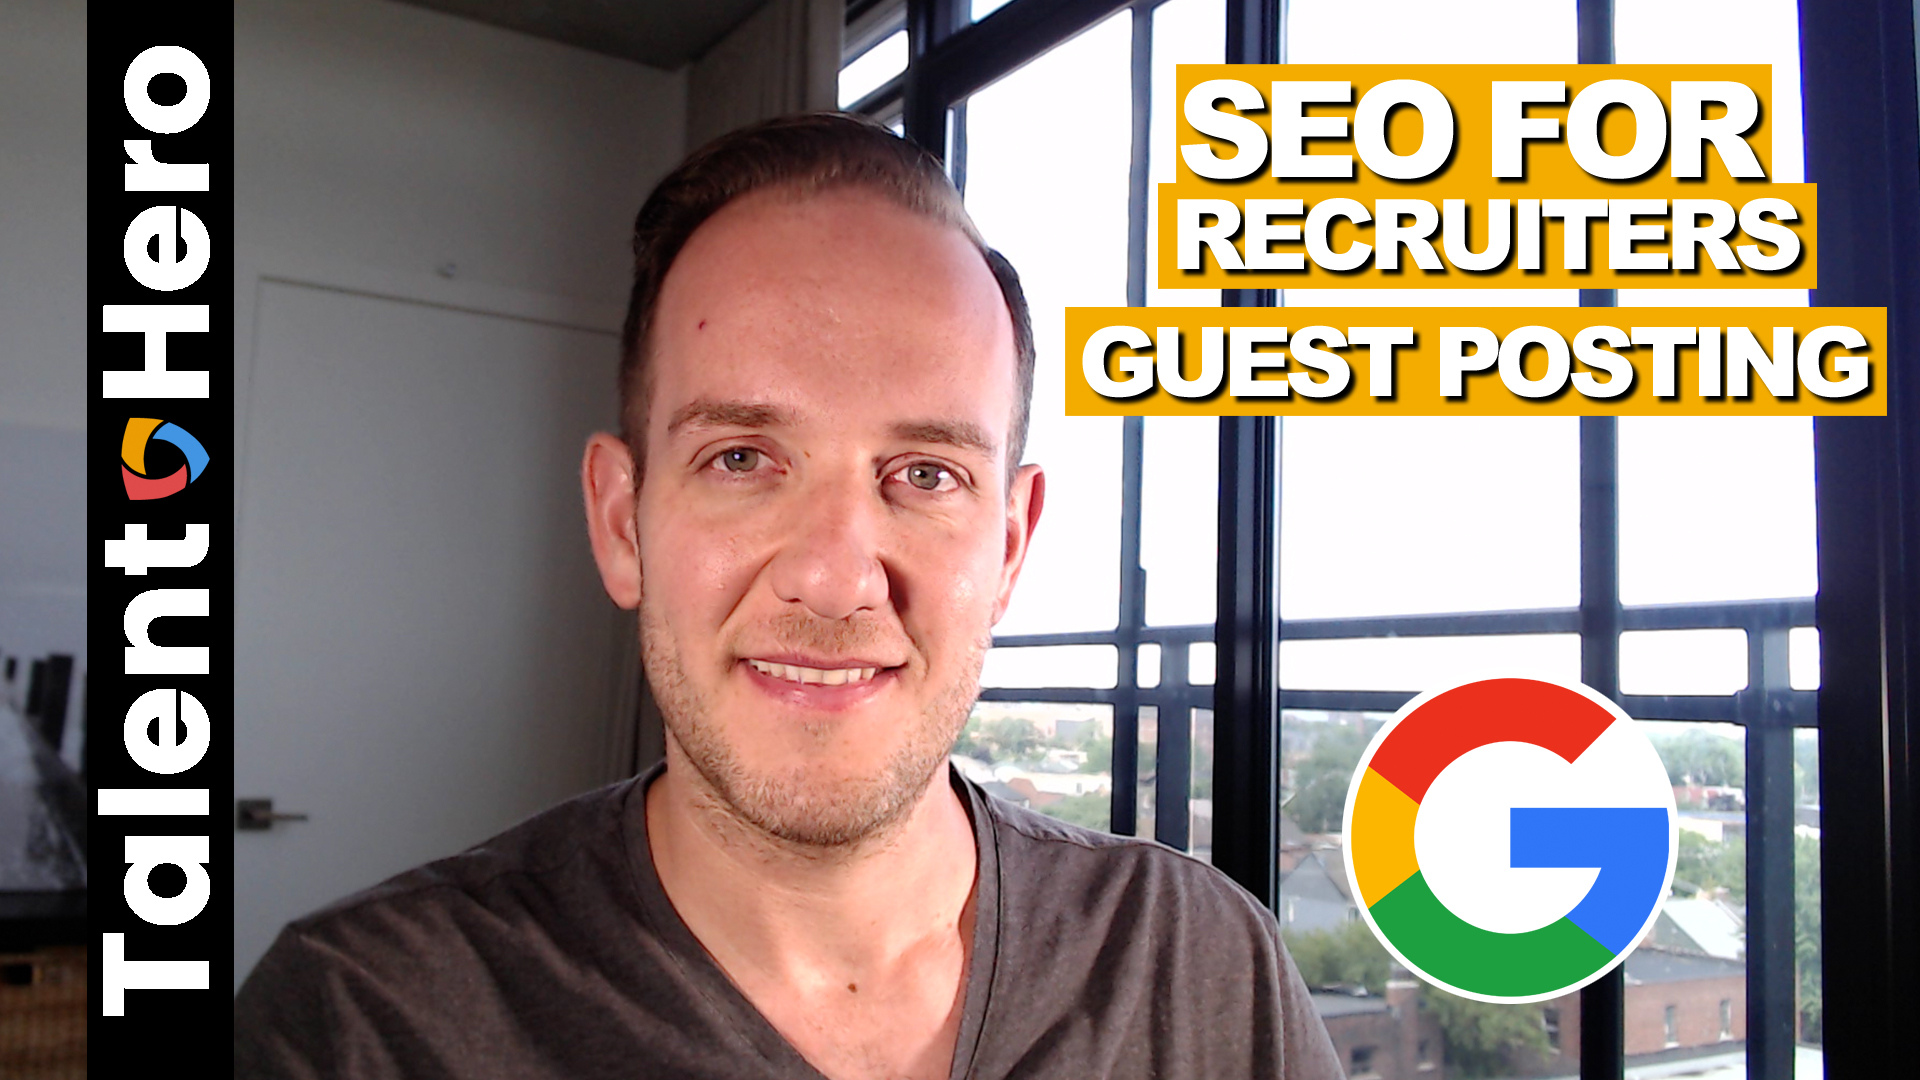 SEO-For-Recruiters-Guest-Posting-Thumbnail